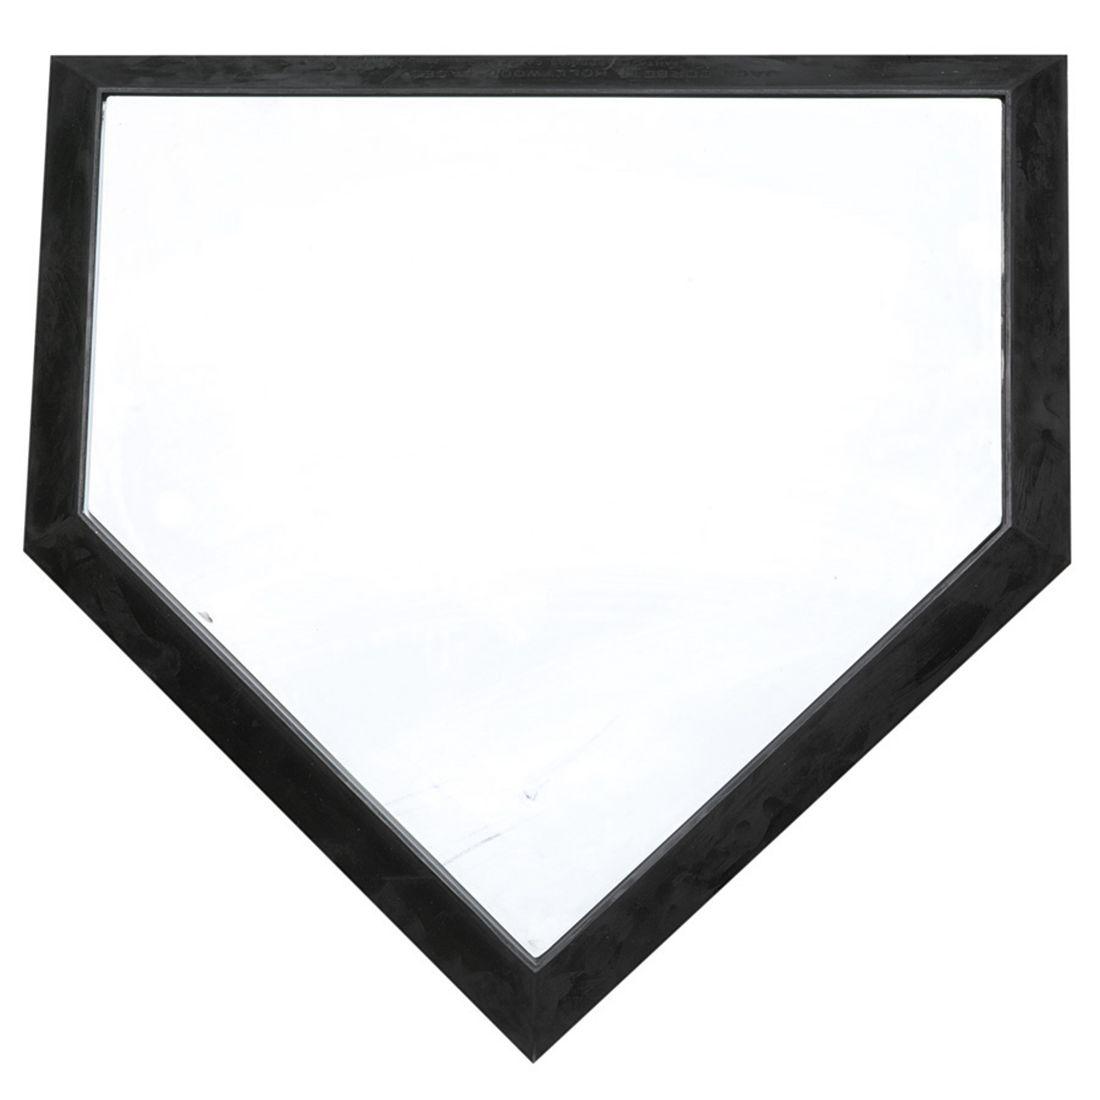 Baseball Home Plate Logo - OFFICIAL SIZE HOME PLATE